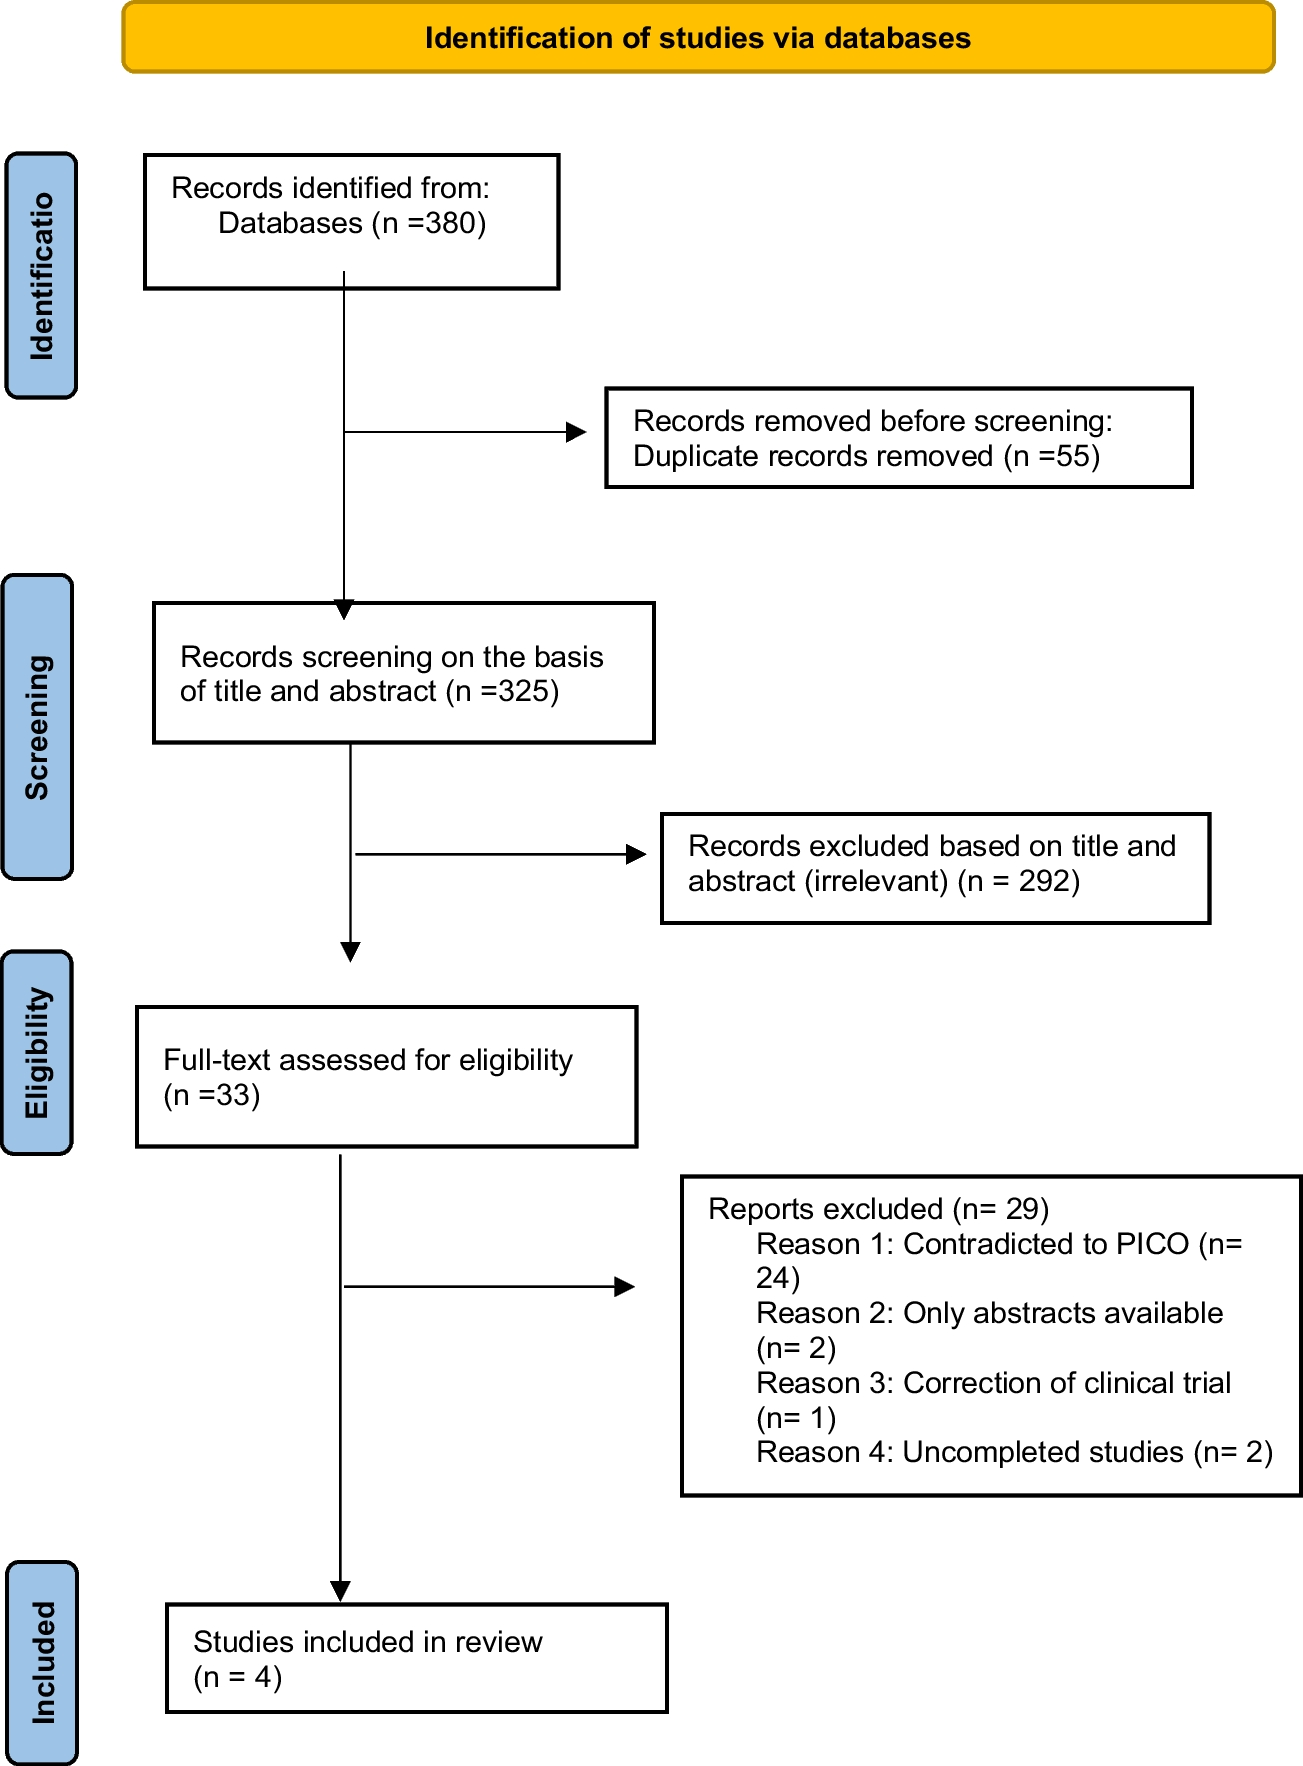 The efficacy and safety of lecanemab 10 mg/kg biweekly compared to a placebo in patients with Alzheimer’s disease: a systematic review and meta-analysis of randomized controlled trials